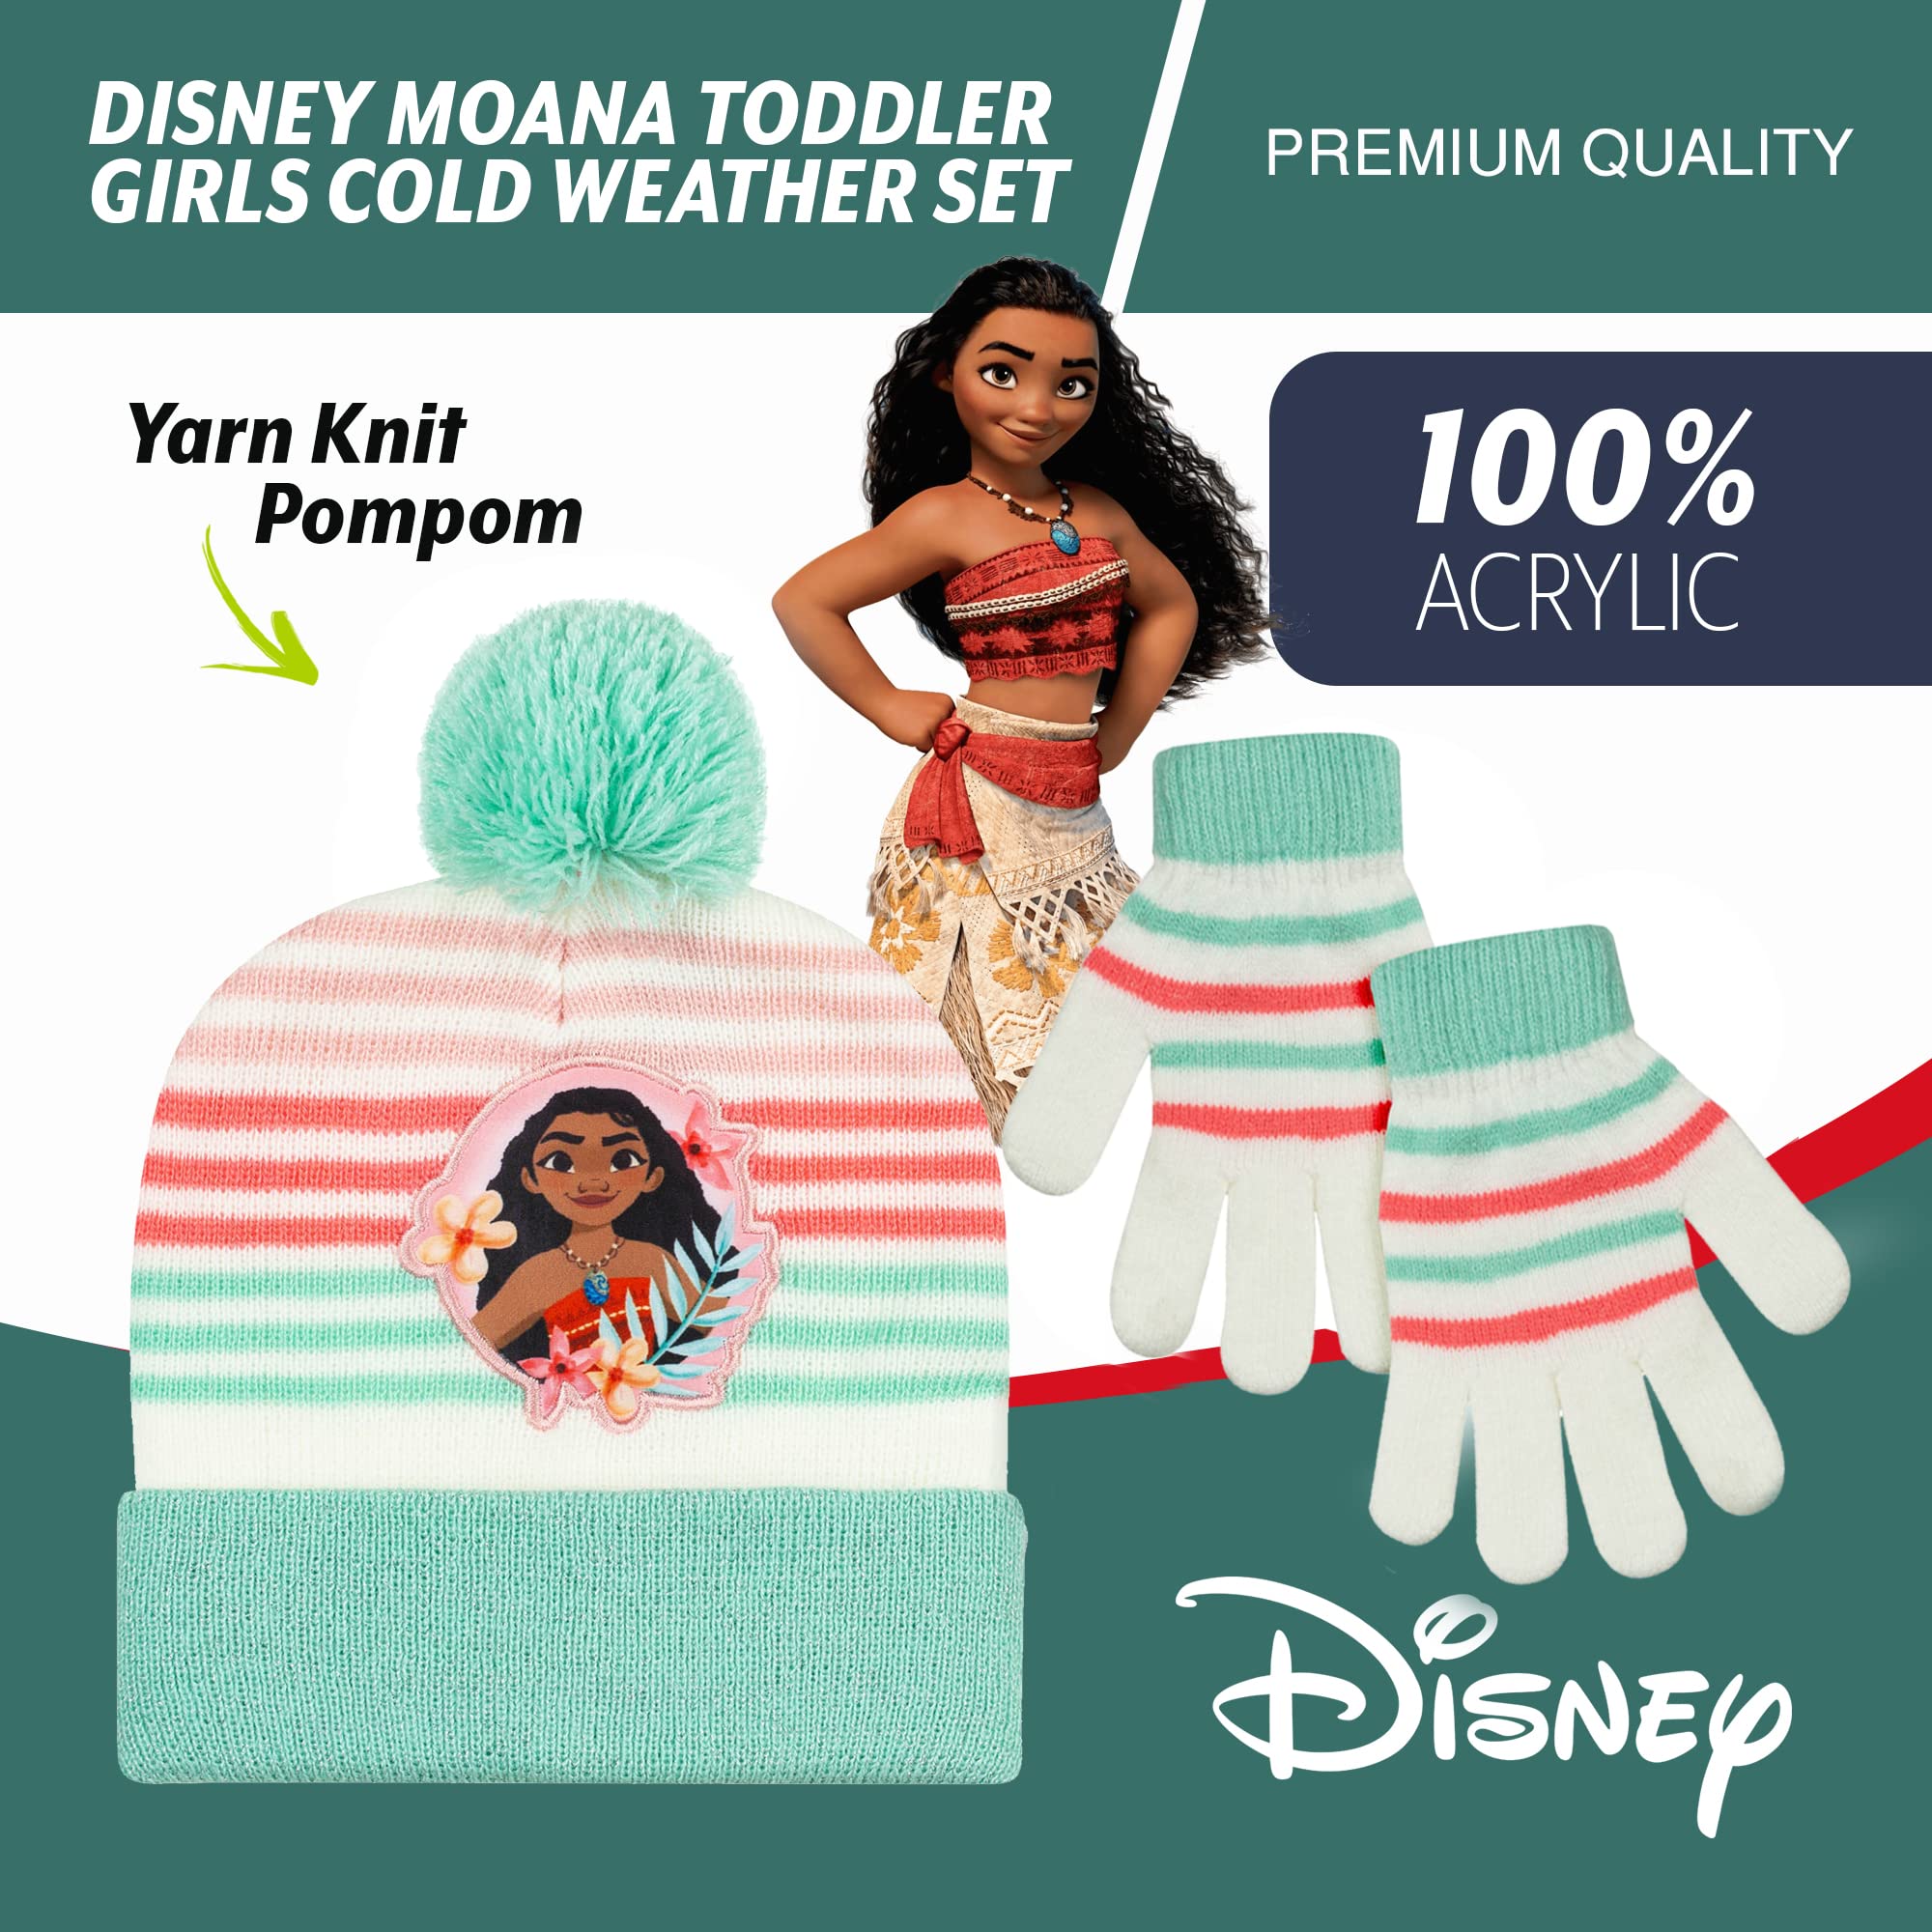 Disney Moana Girls Beanie Winter Hat and Mittens Cold Weather Set, Age 4-7 years